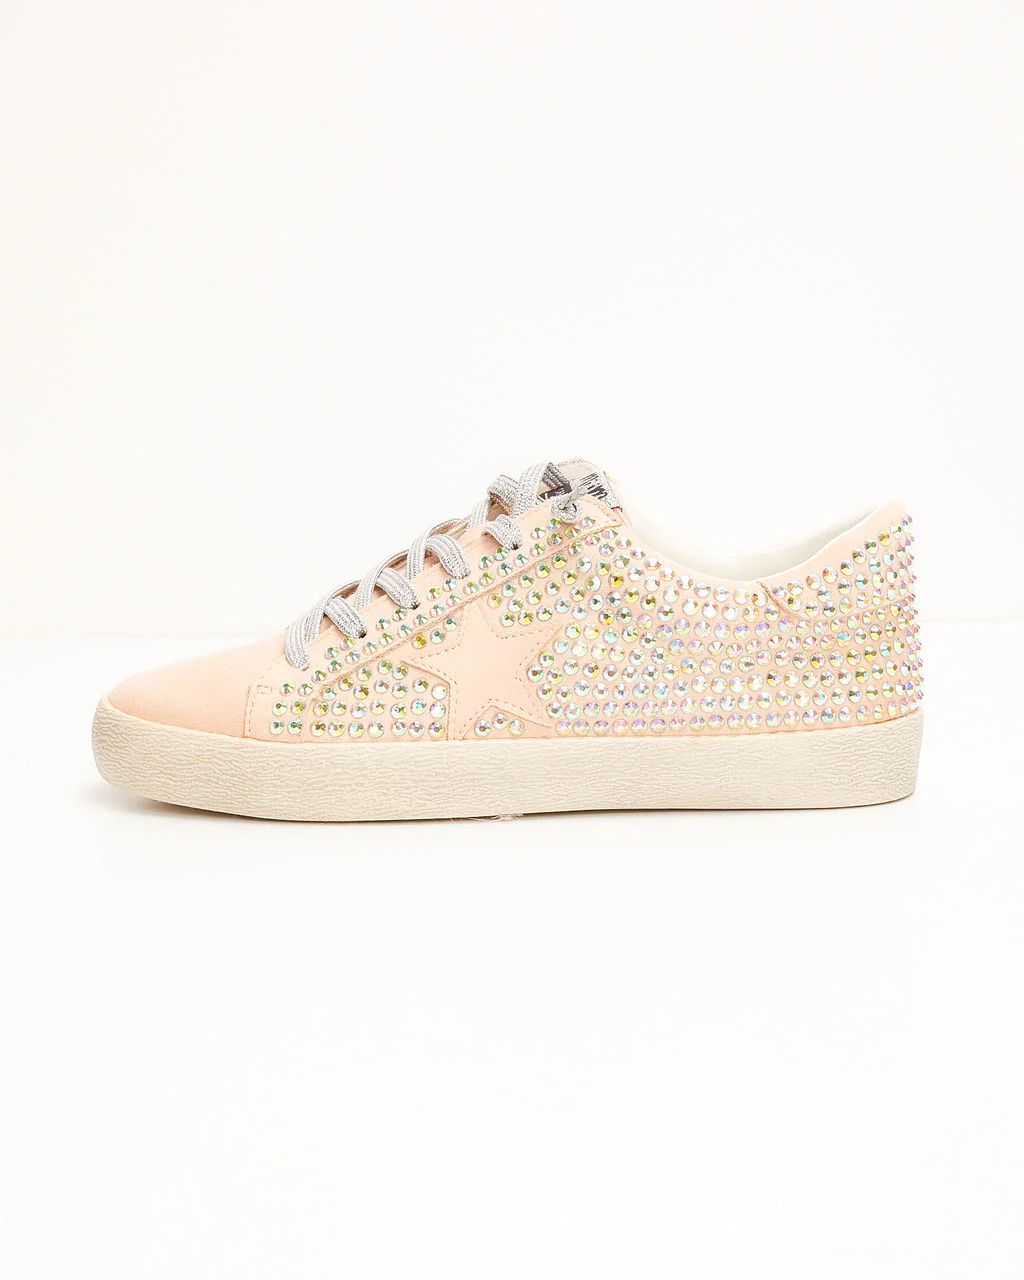 Stardust Bejeweled Sneakers | VICI Collection